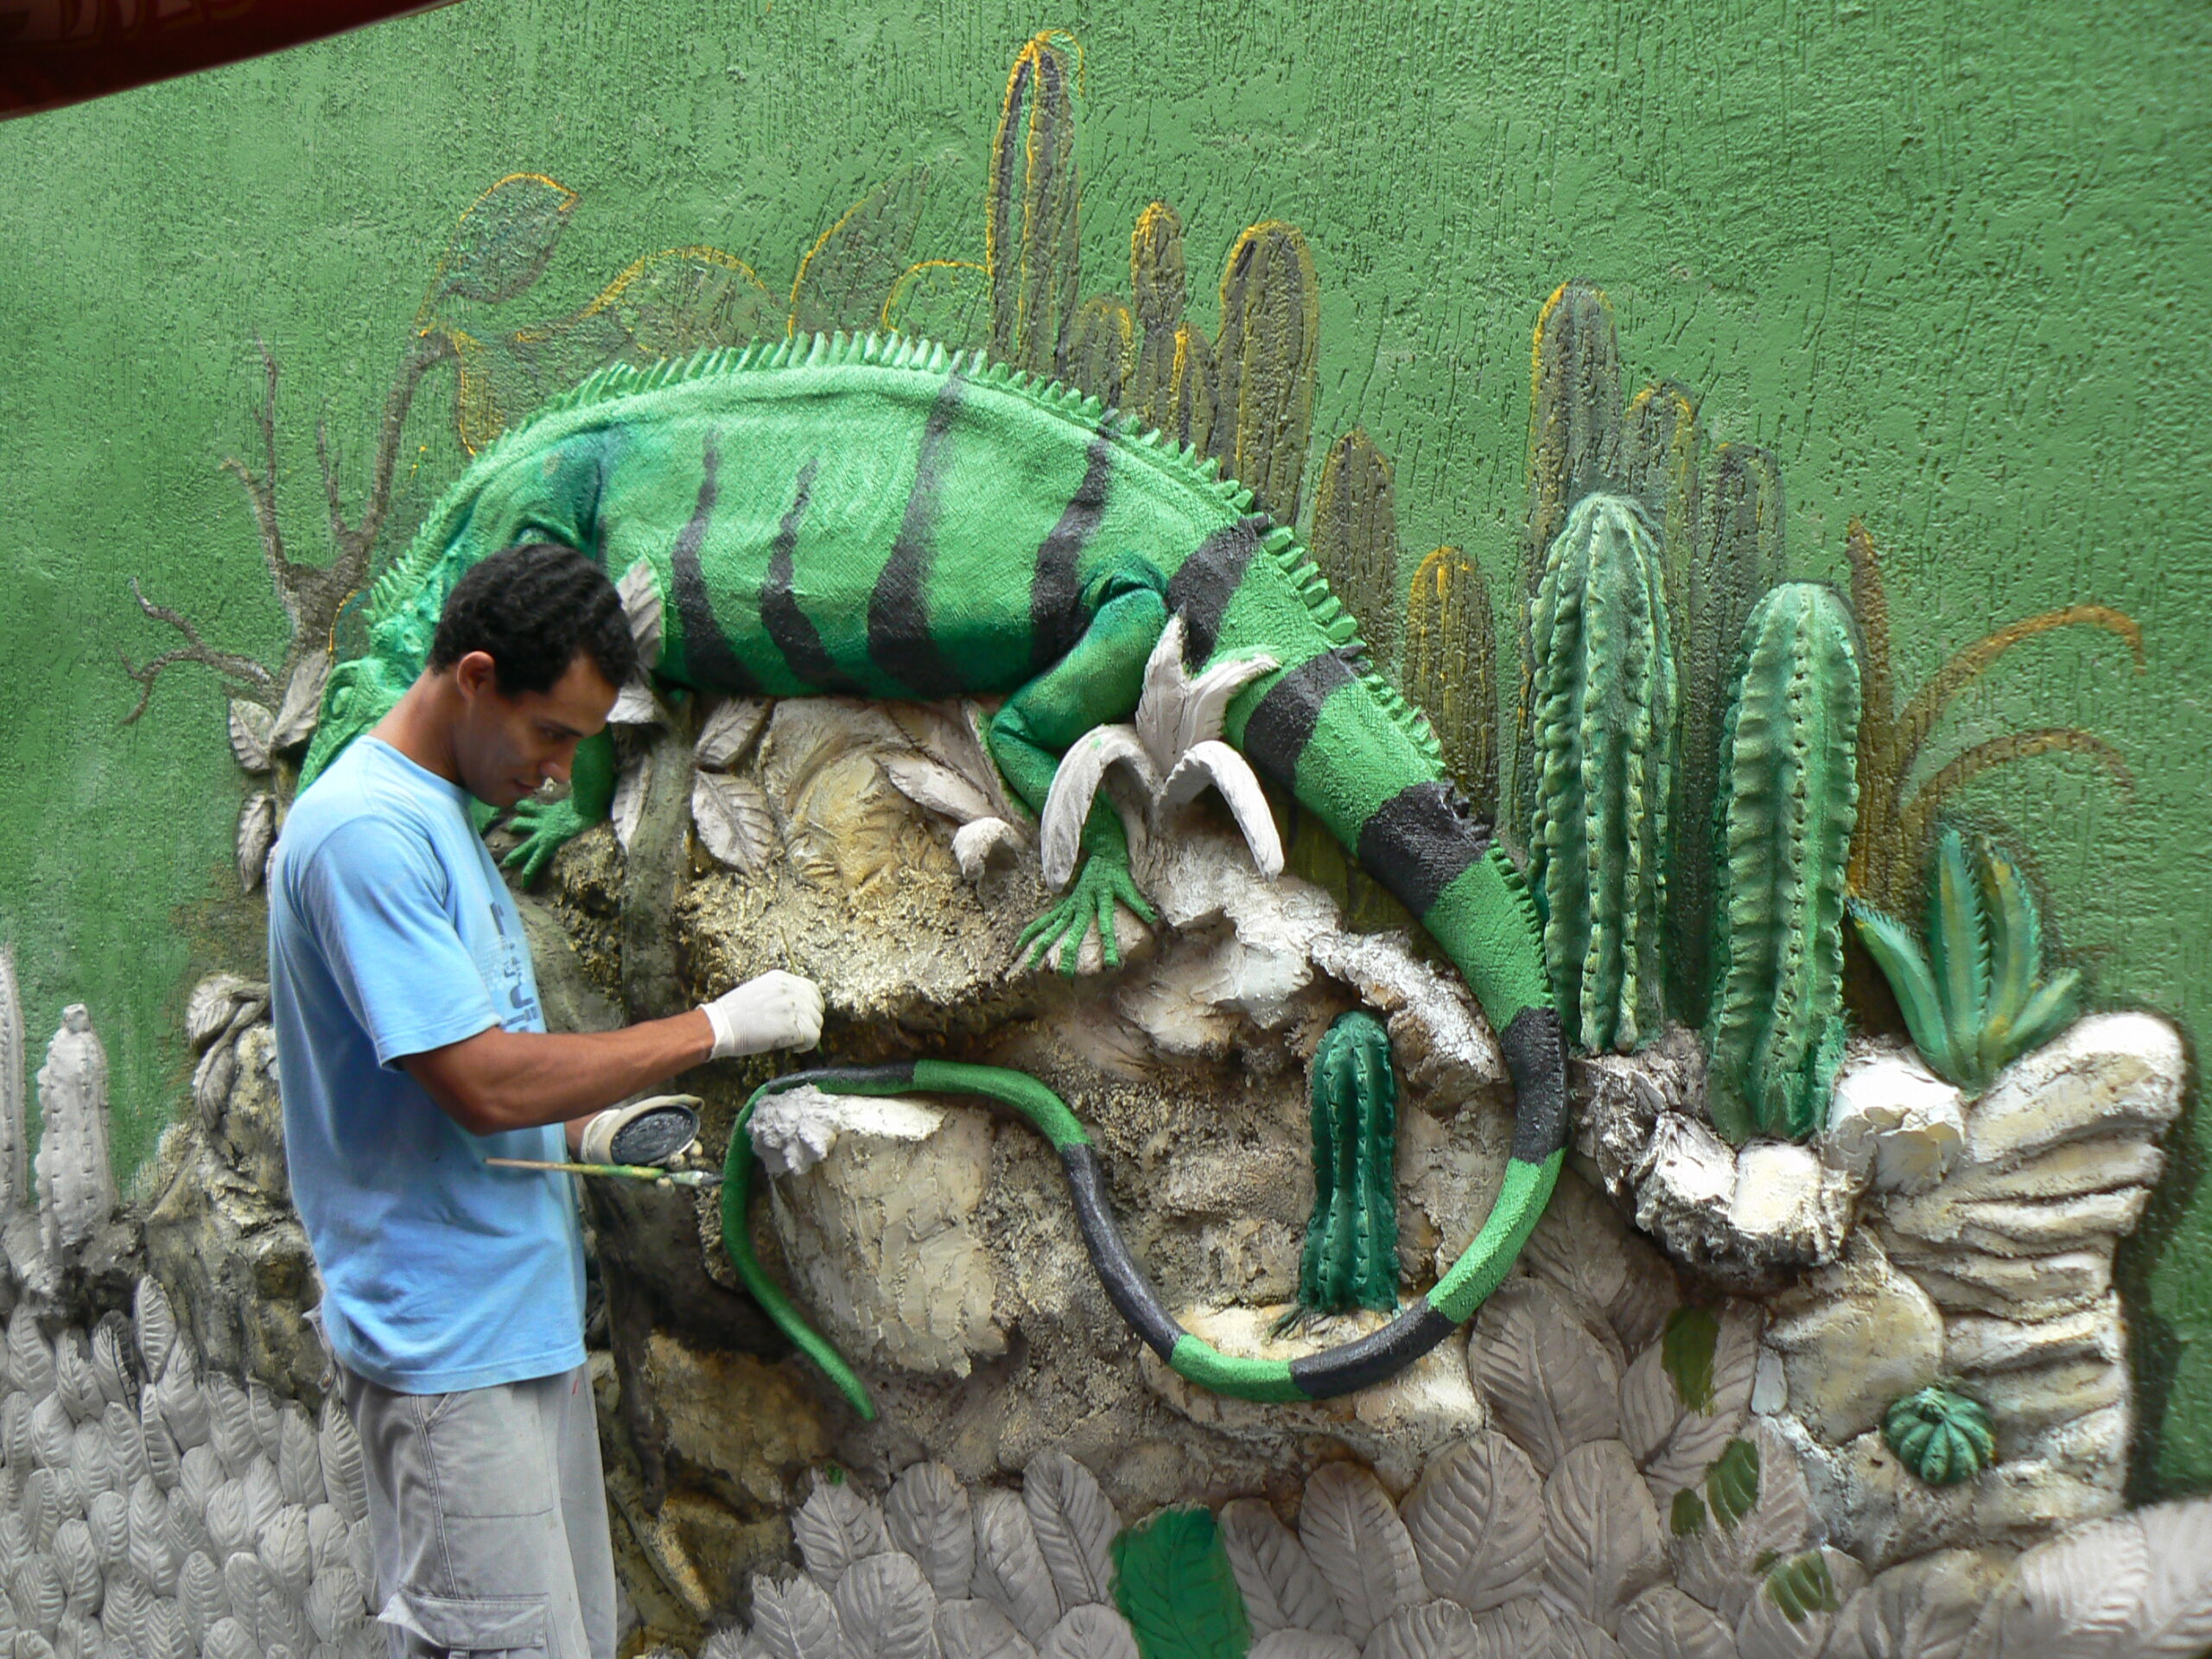 Once the cement dried, it was painted with vivid colors which added more realism to the mural.